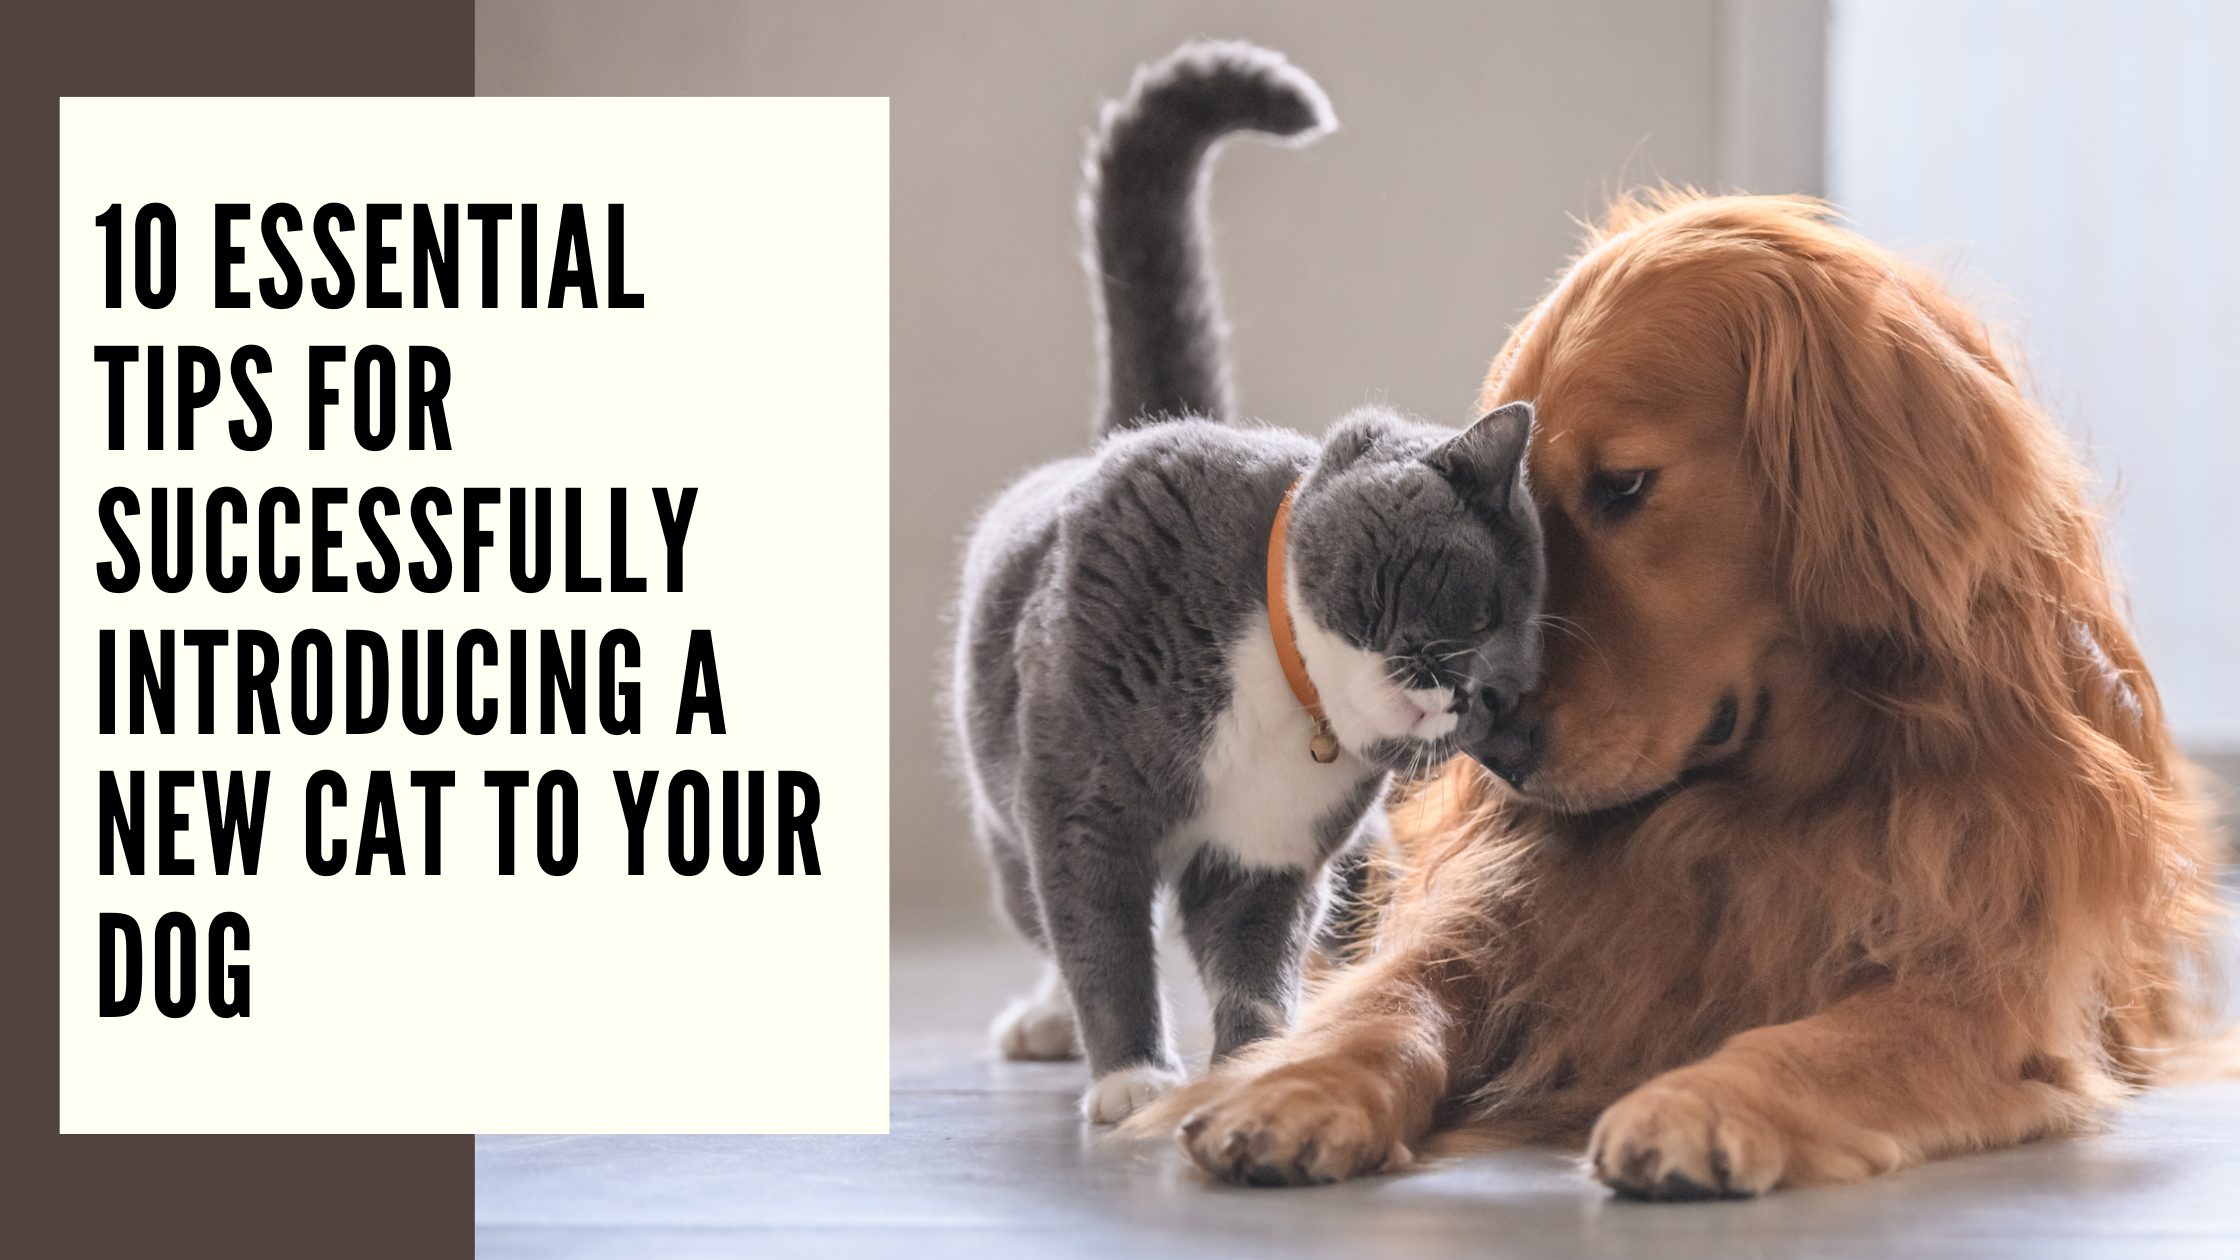 10 Essential Tips for Successfully Introducing a New Cat to Your Dog